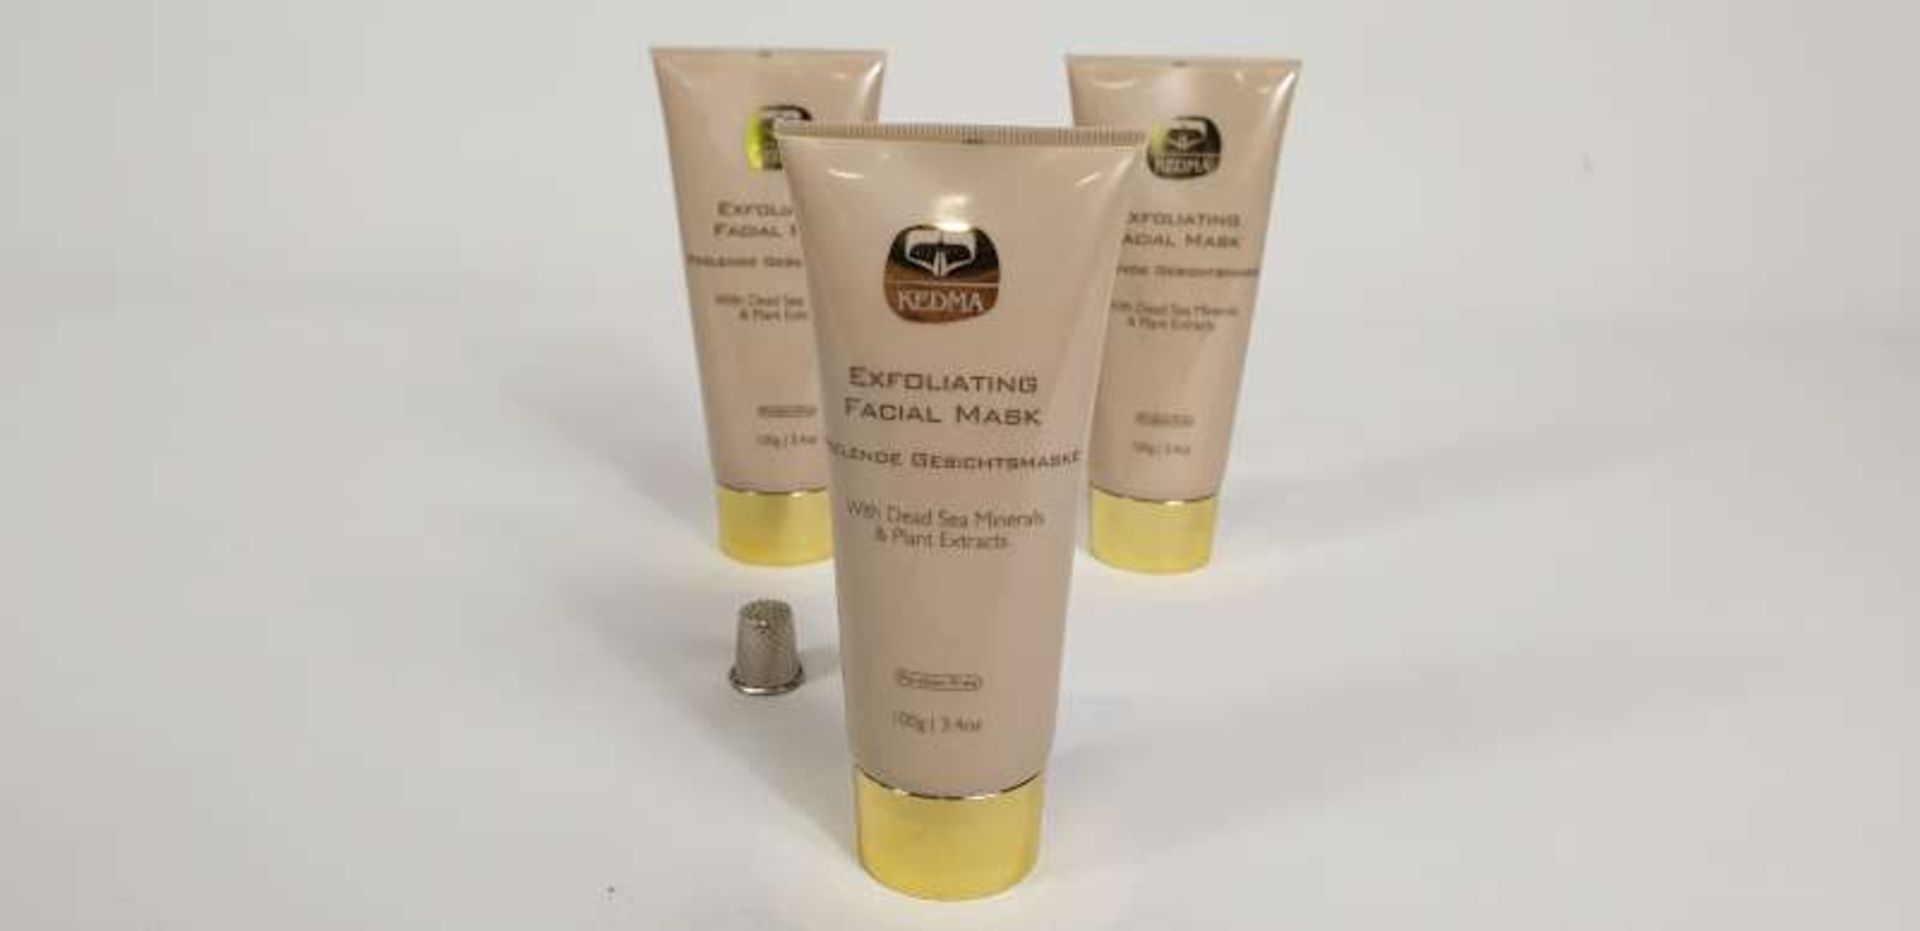 12 X KEDMA EXFOLIATING FACIAL MASK WITH DEAD SEA MINERALS AND PLANT EXTRACTS